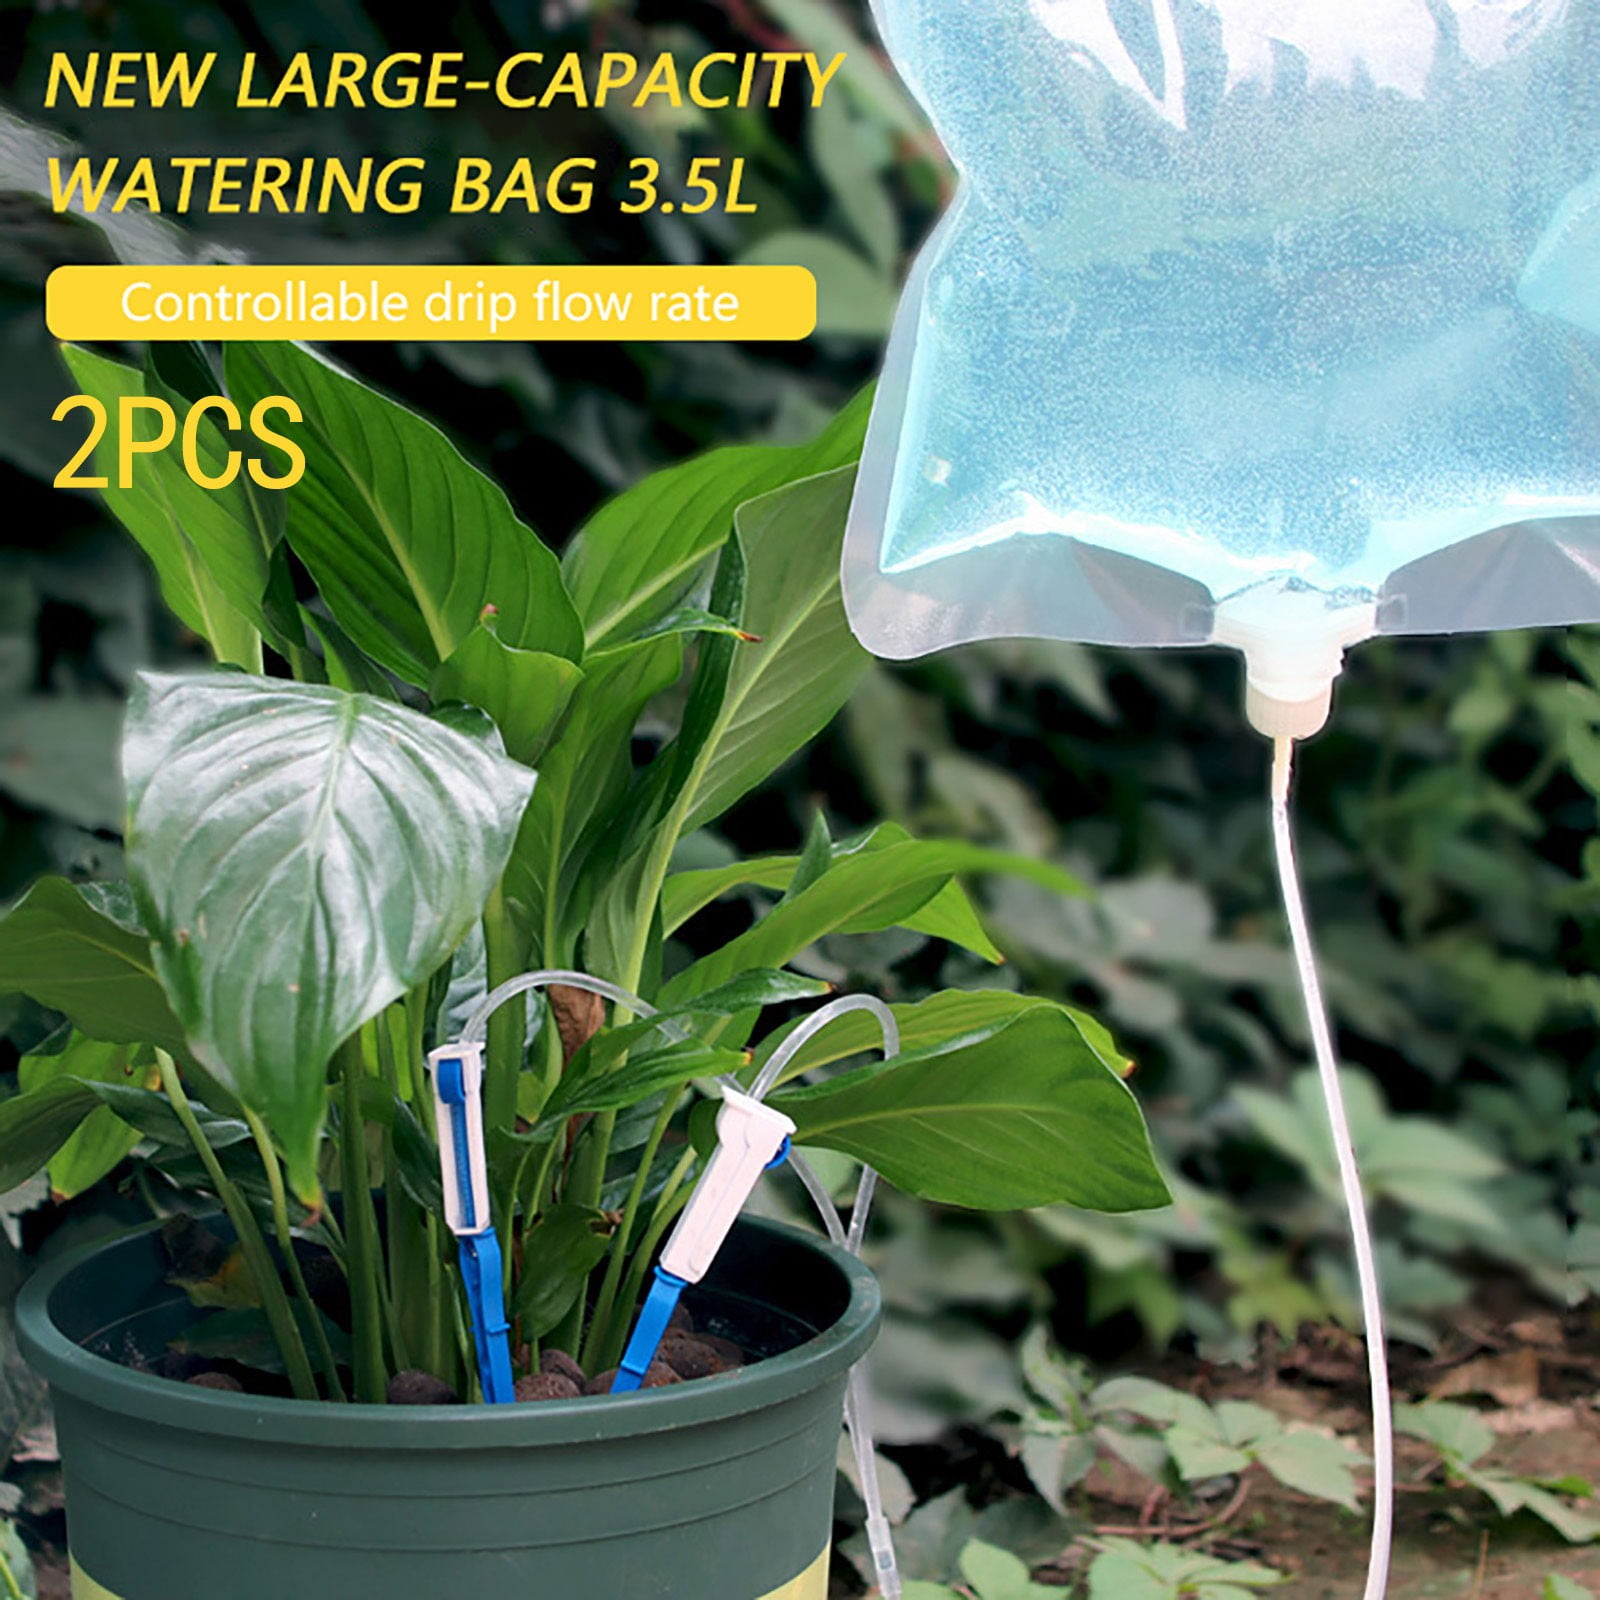 Bag Drip Watering System Automatic Drip Irrigation Kits for greenhouses with Bag Self Watering System for Plants Outdoor with 3.5L Water Bag and regulating Valve for Vacation Plant Watering 1pcs